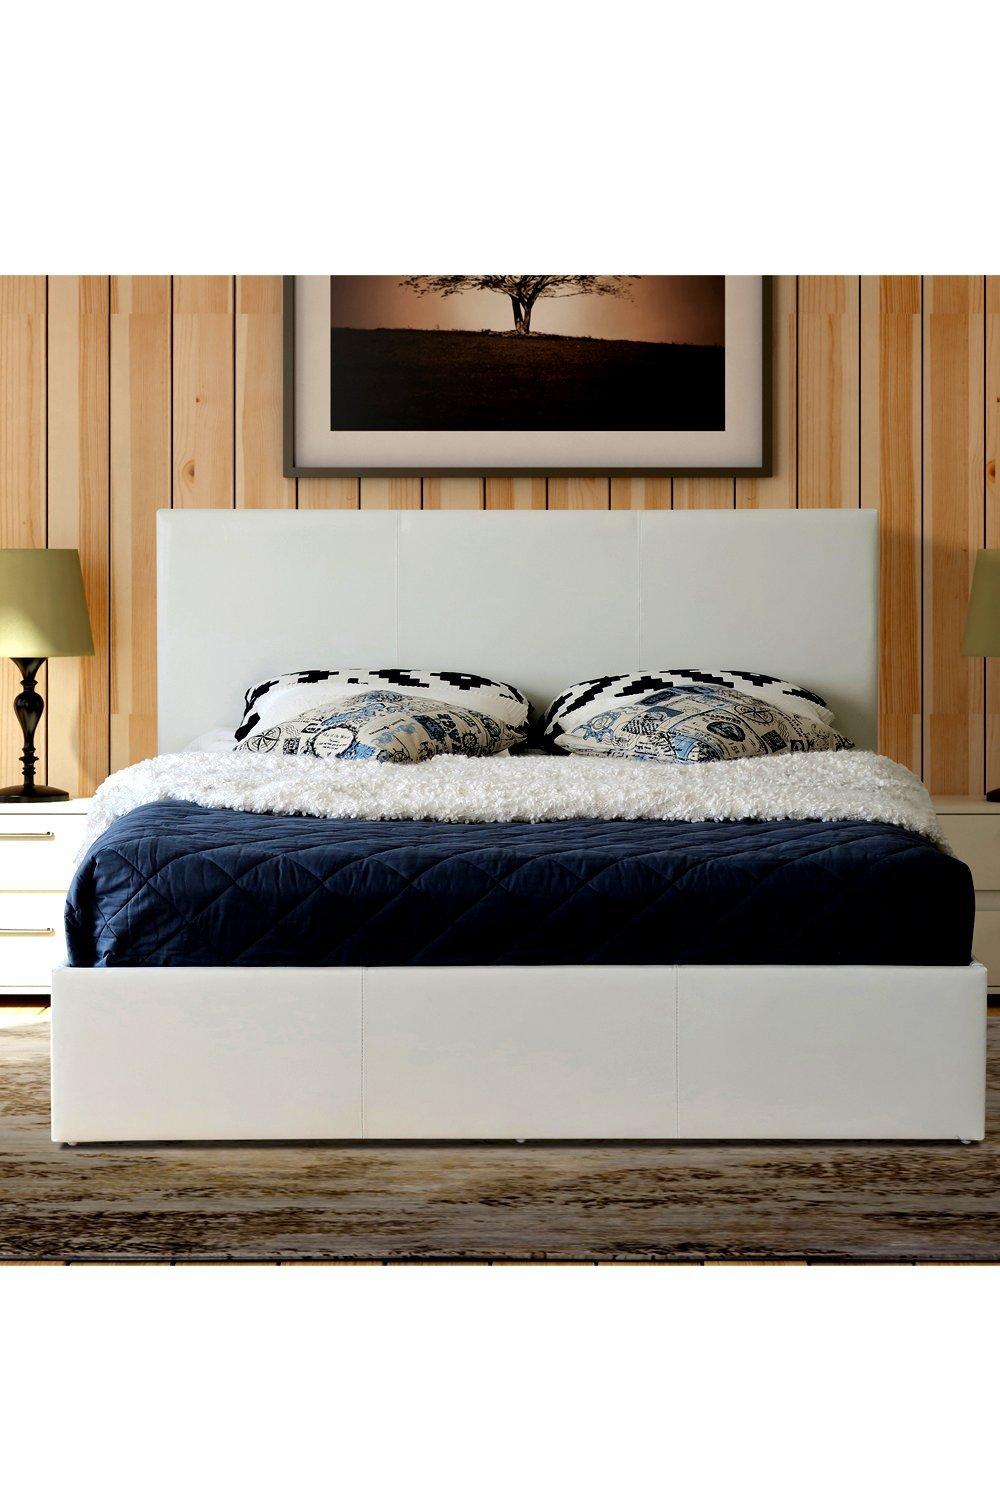 Leather Ottoman Storage Bed with Wooden Slatted Gas Liftup Base.